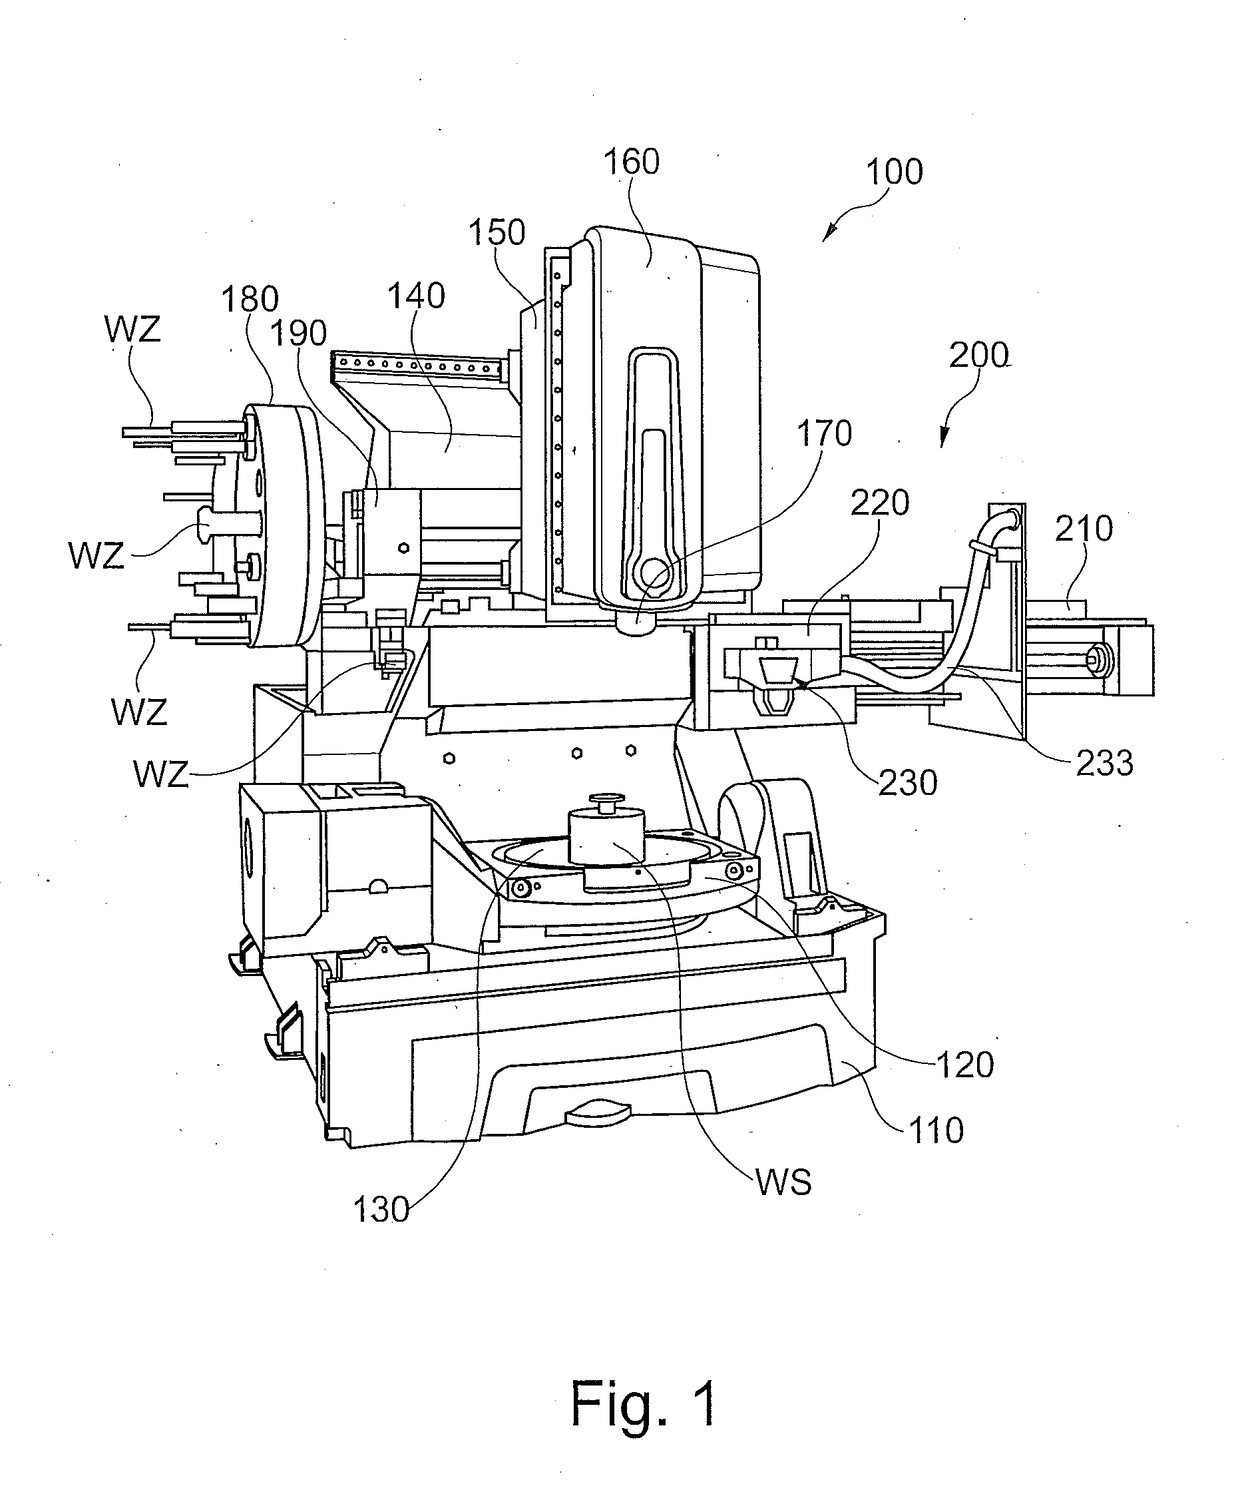 Coupling system for use with a spindle apparatus of a machine tool